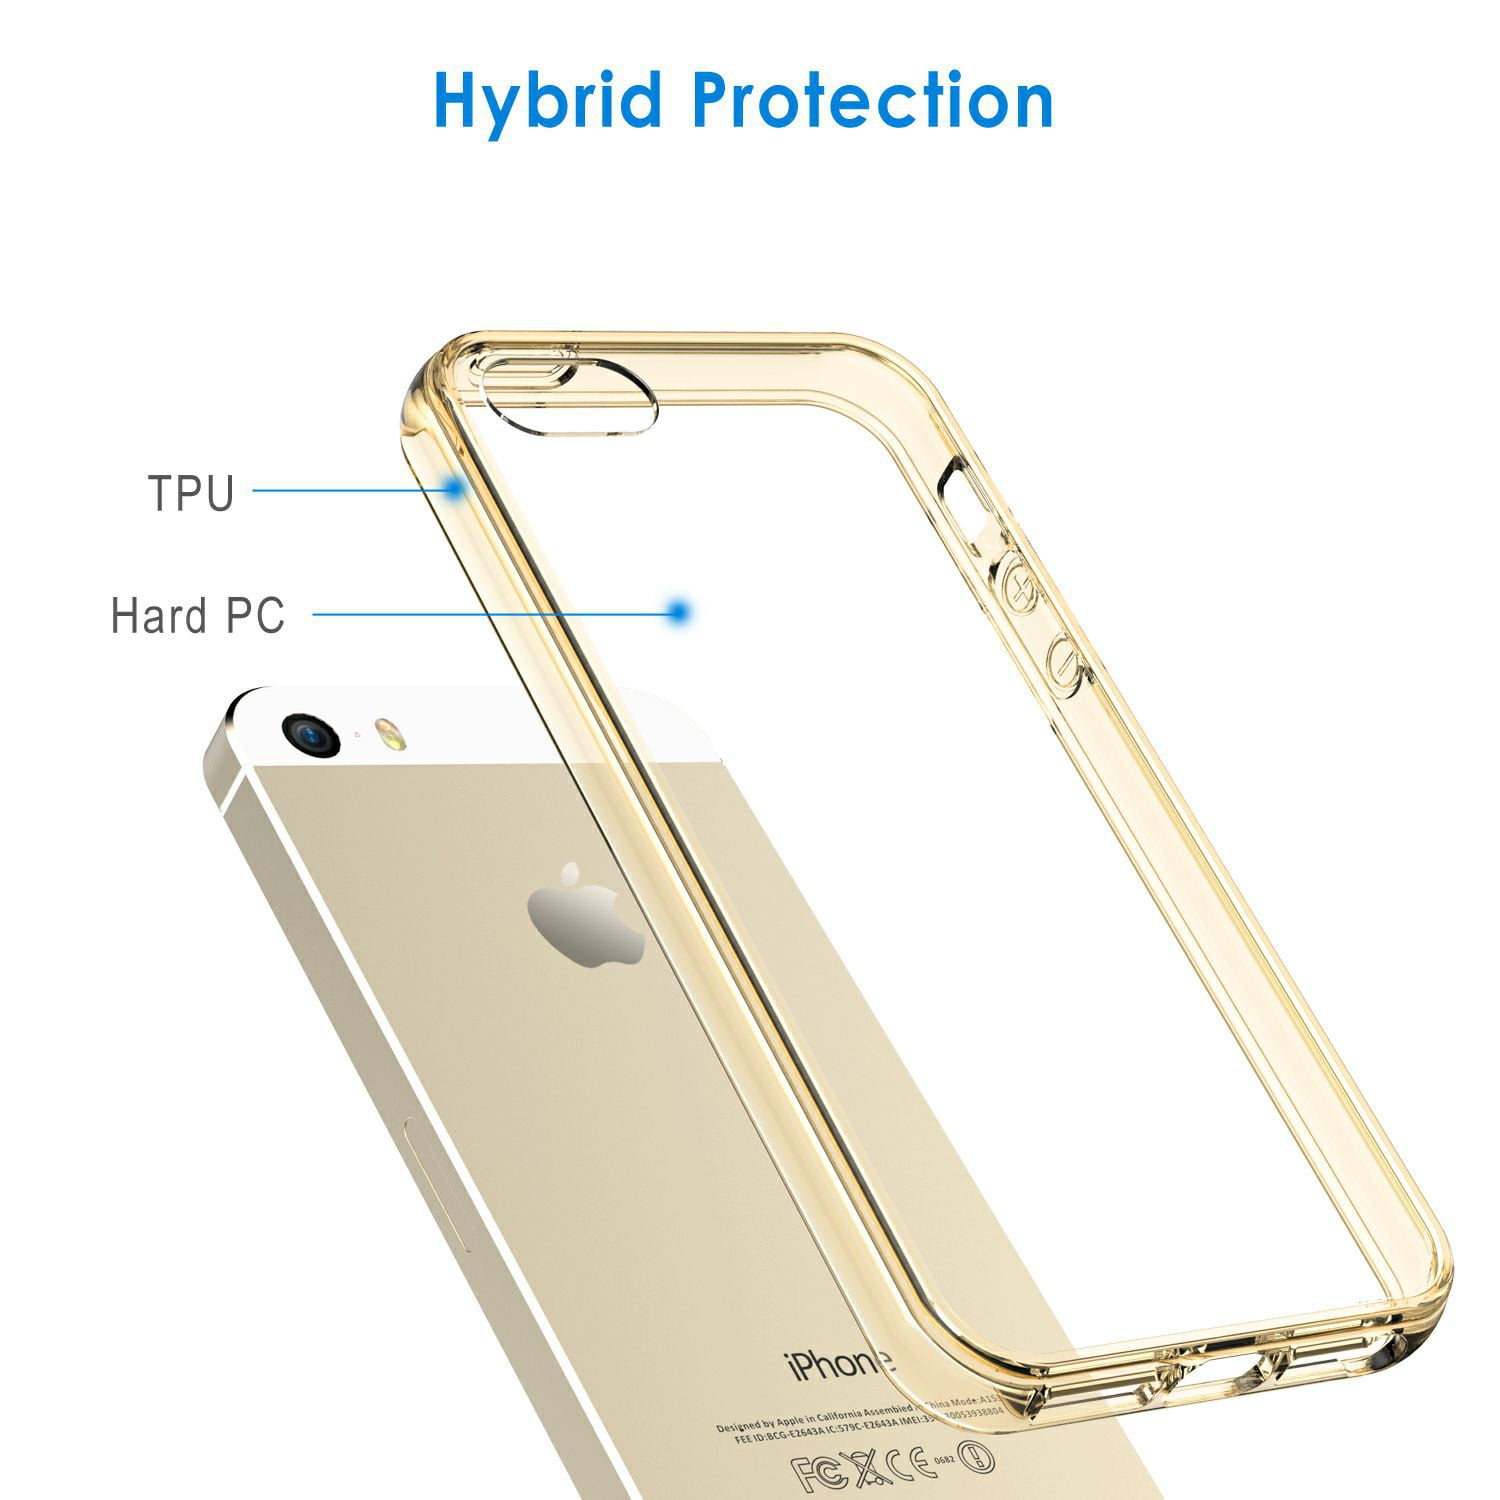 JETech Case for iPhone SE 2016 (Not for 2020), iPhone 5s and iPhone 5,  Non-Yellowing Shockproof Phone Bumper Cover, Anti-Scratch Clear Back (Clear)